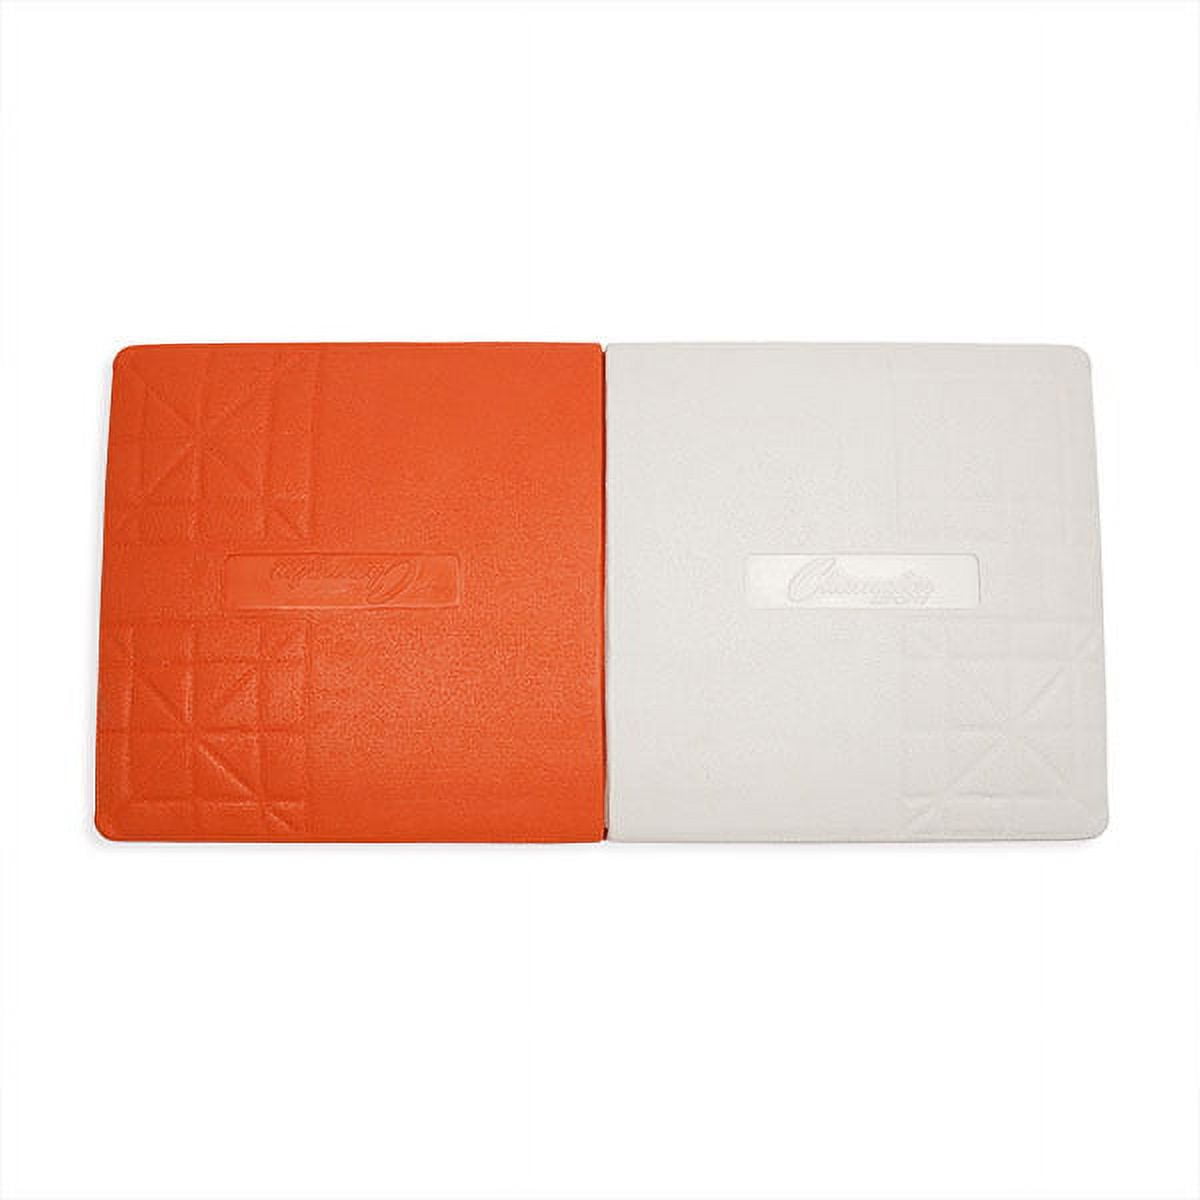 Picture of Champion Sports M950 Breakaway Double First Base, Orange & White